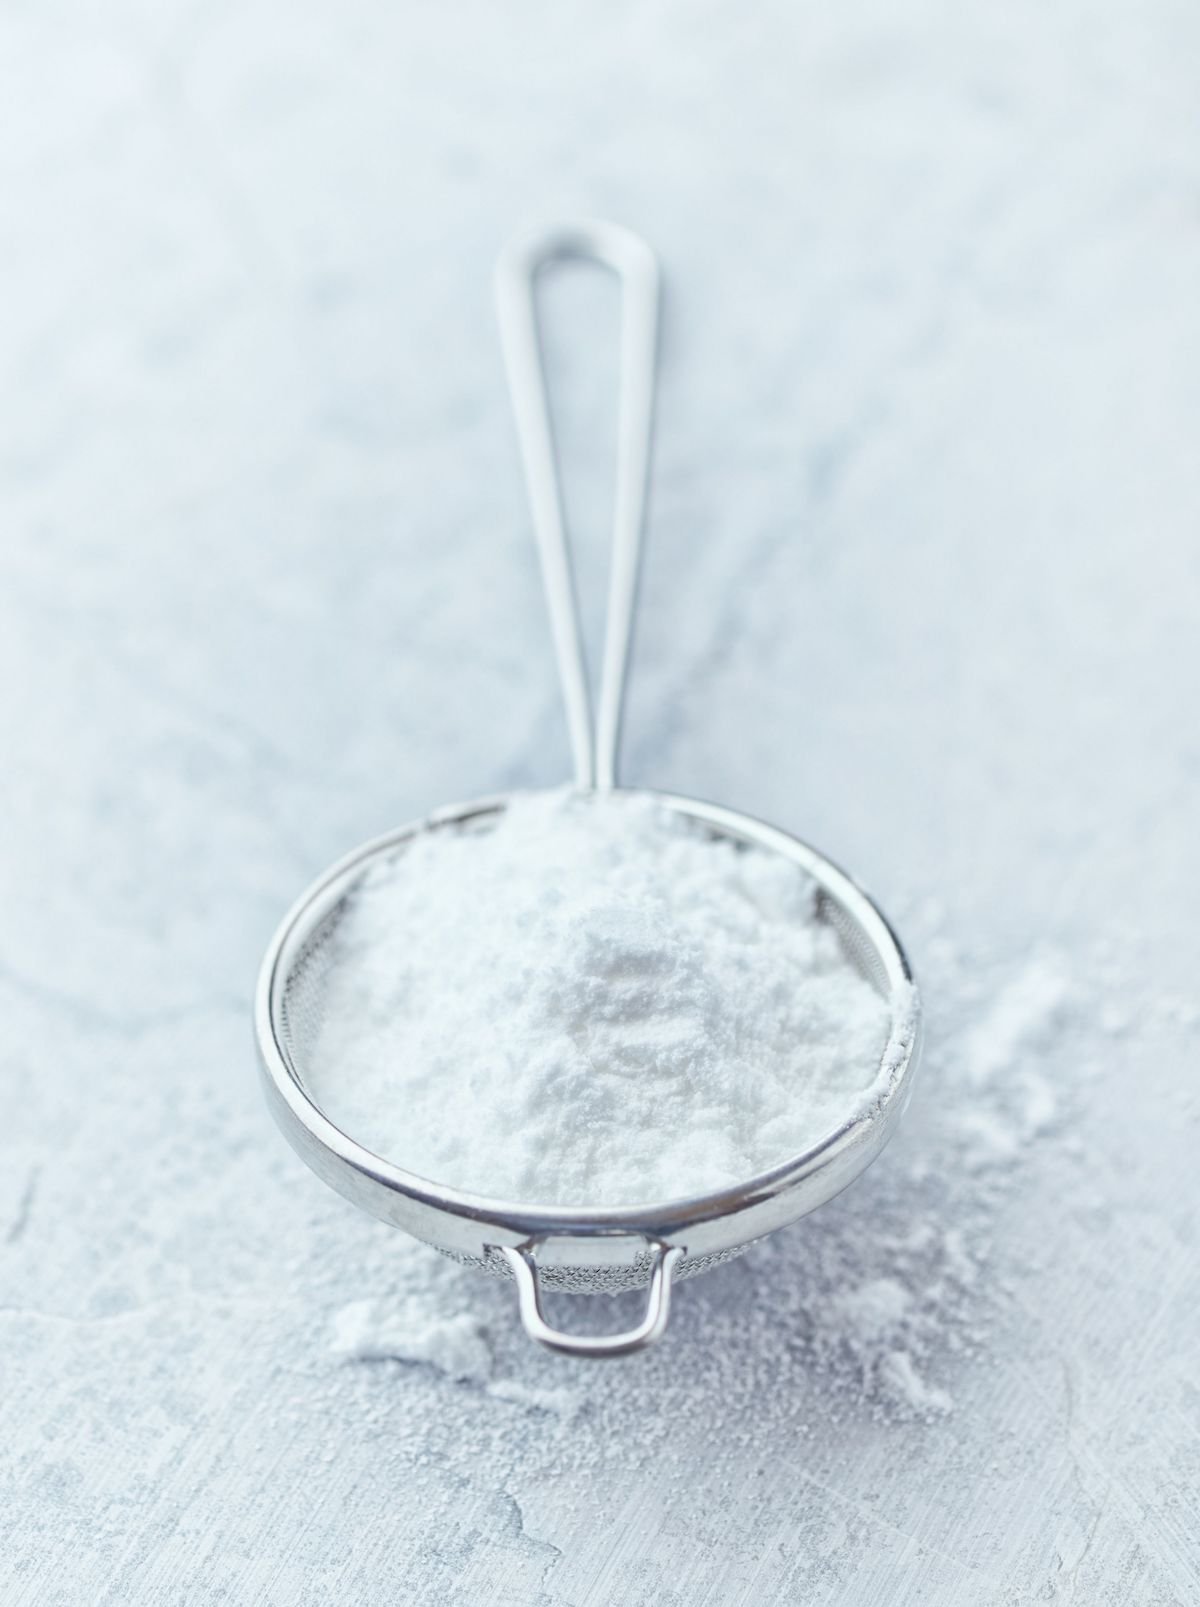 Icing sugar in a small sieve